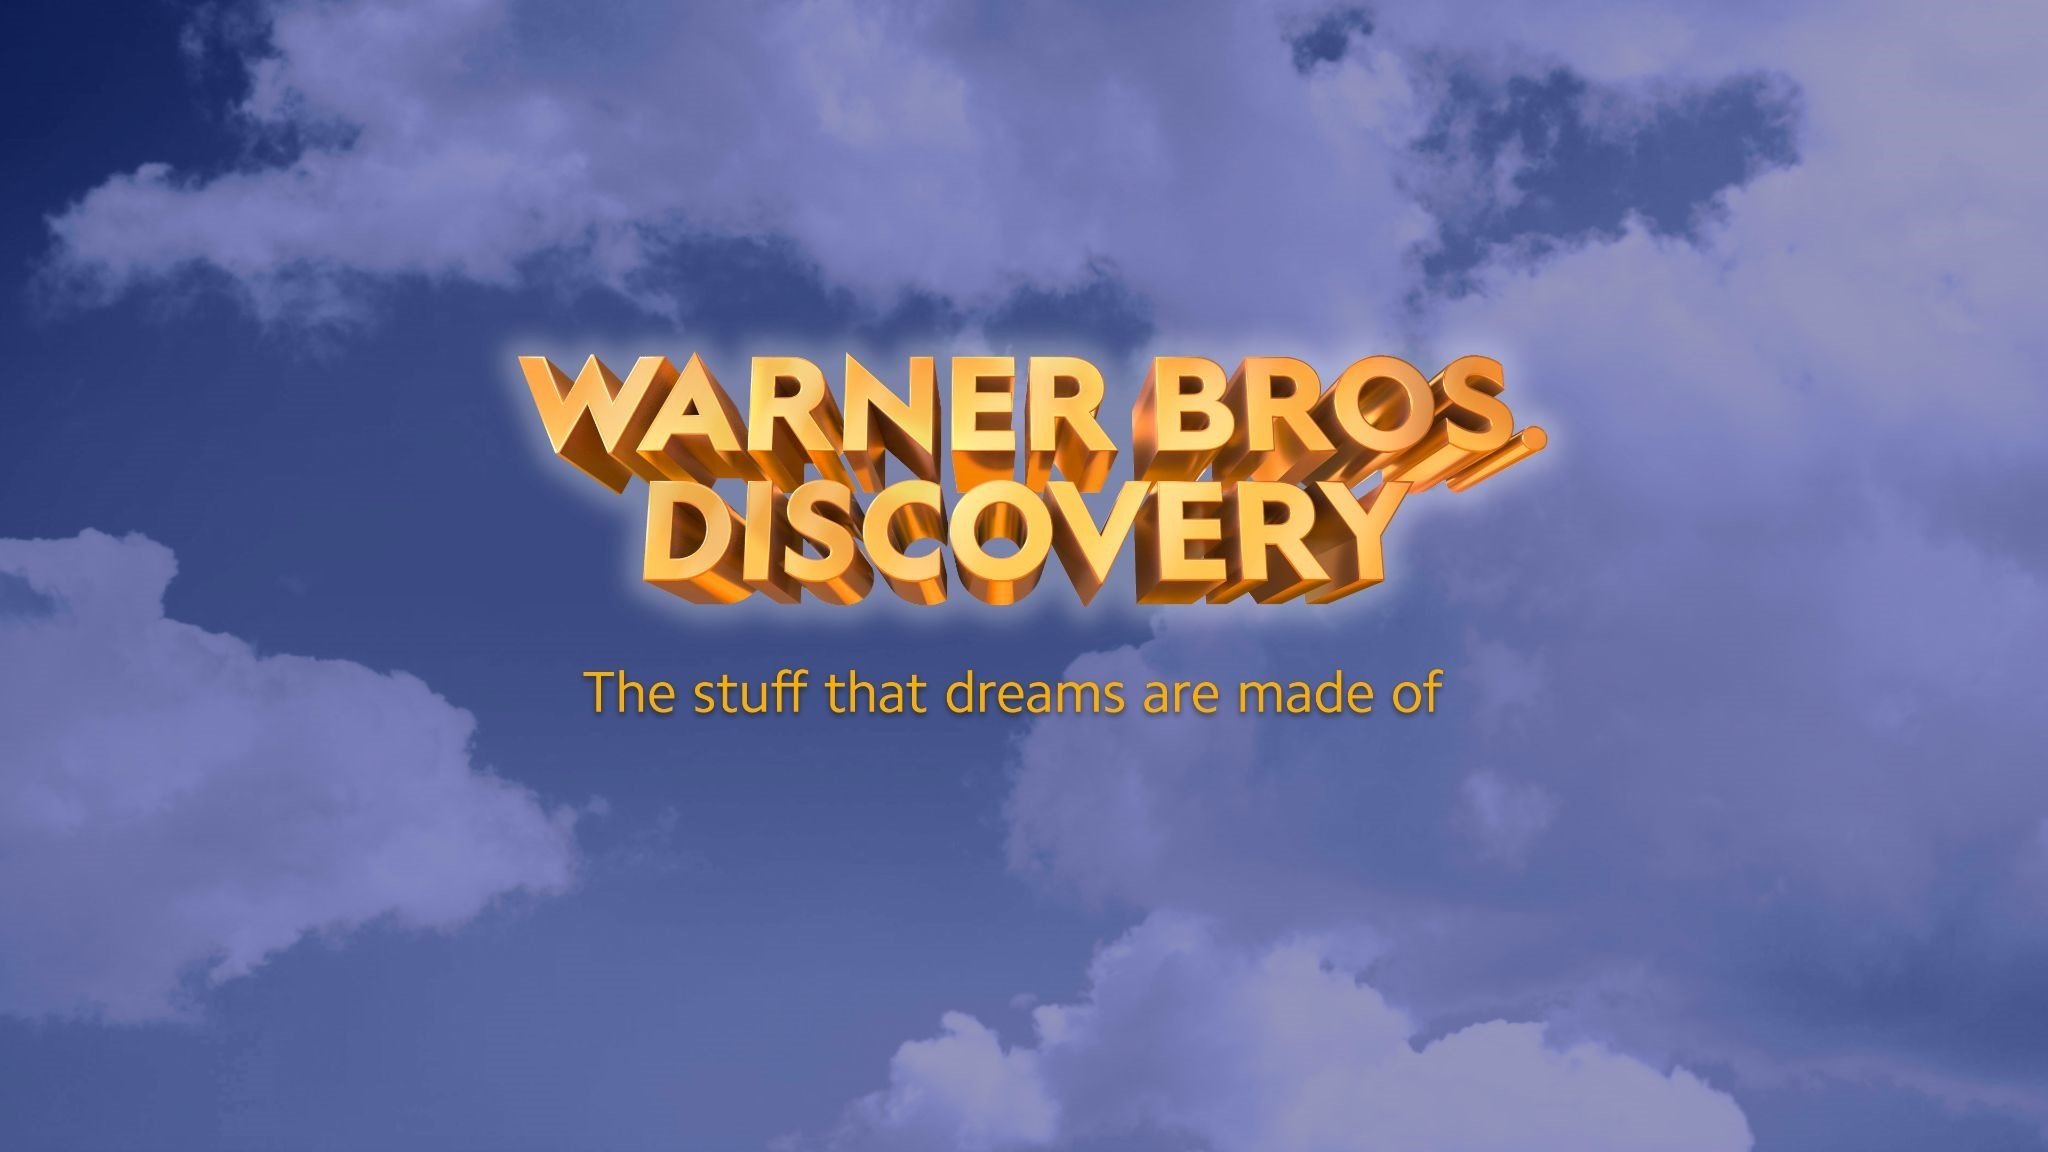  Warner Bros. Discovery plans 2023 launch for new combined HBO Max, Discovery+ streaming service